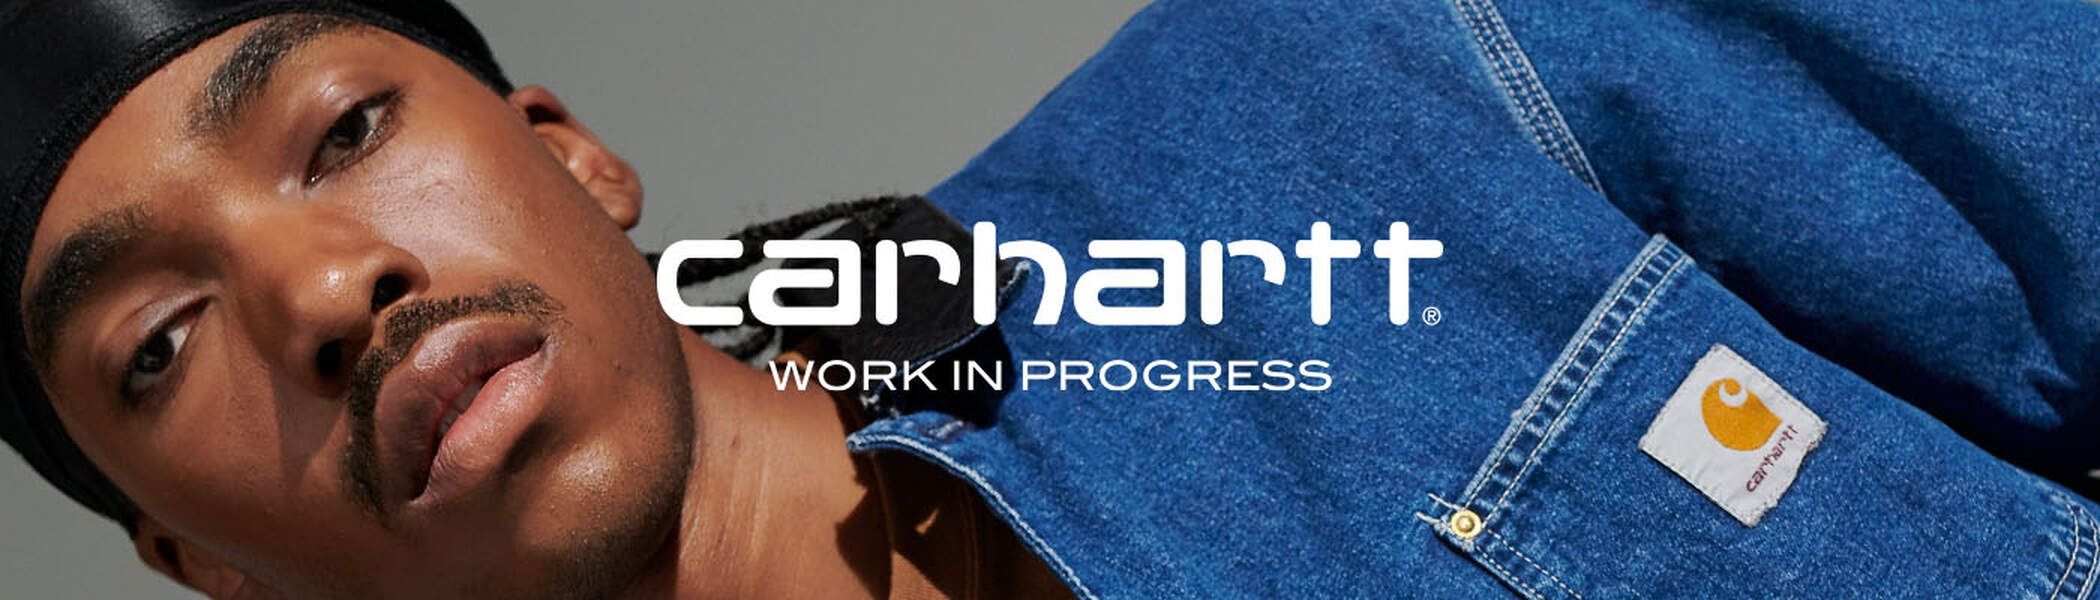 Carhartt WIP online at SNIPES